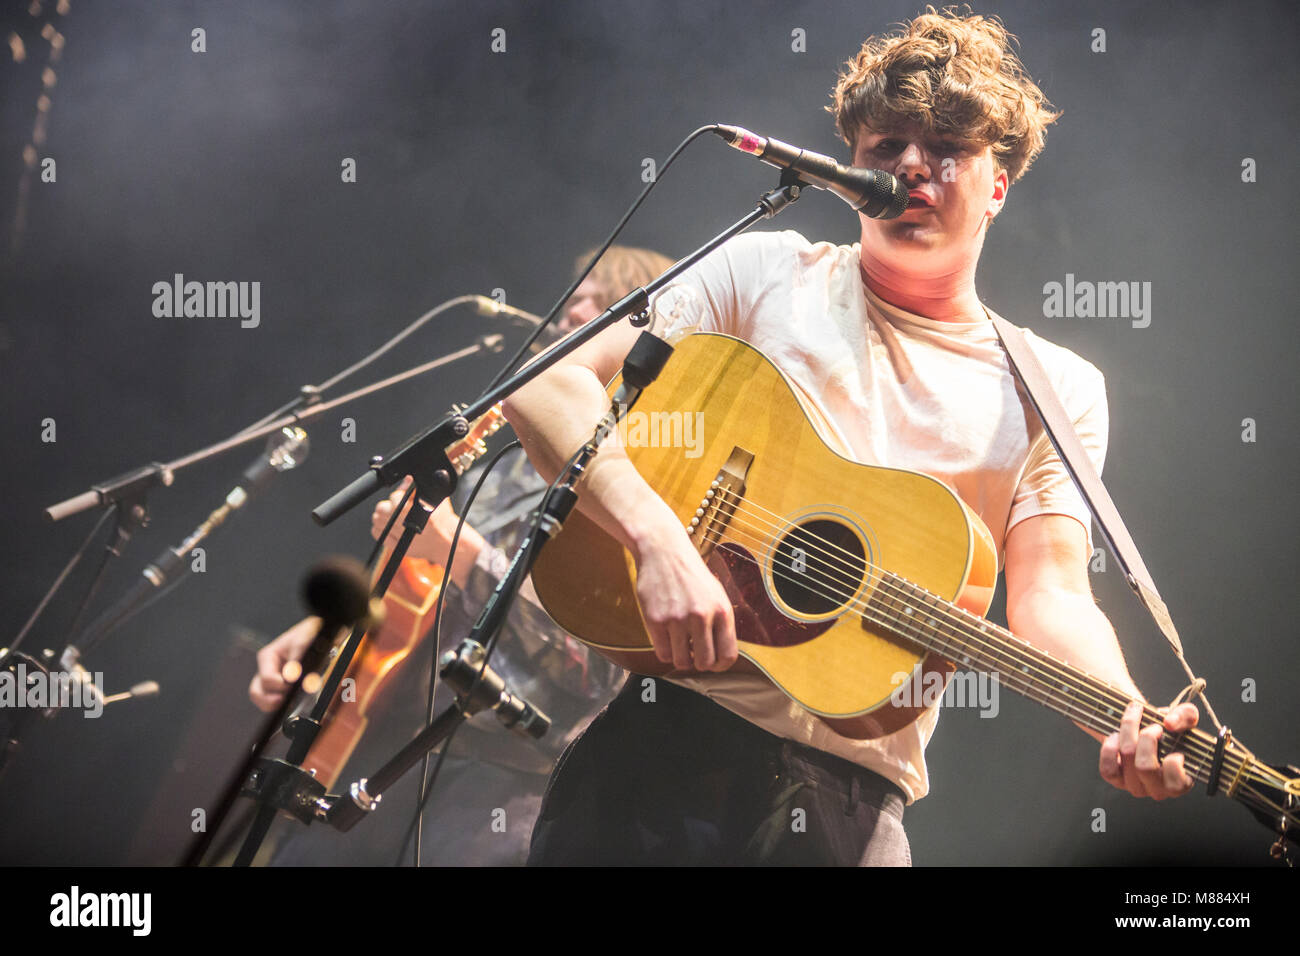 Wetzlar, Germany. 14th Mar, 2018. Faber, Swiss singer-songwriter with band Goran Koč y Vocalist Orkestar, support act for band Kraftklub, at Rittal-Arena Wetzlar. Faber (real Julian Pollina), born in 1993, is the son of Italian singer-songwriter Pippo Pollina. Credit: Christian Lademann Stock Photo